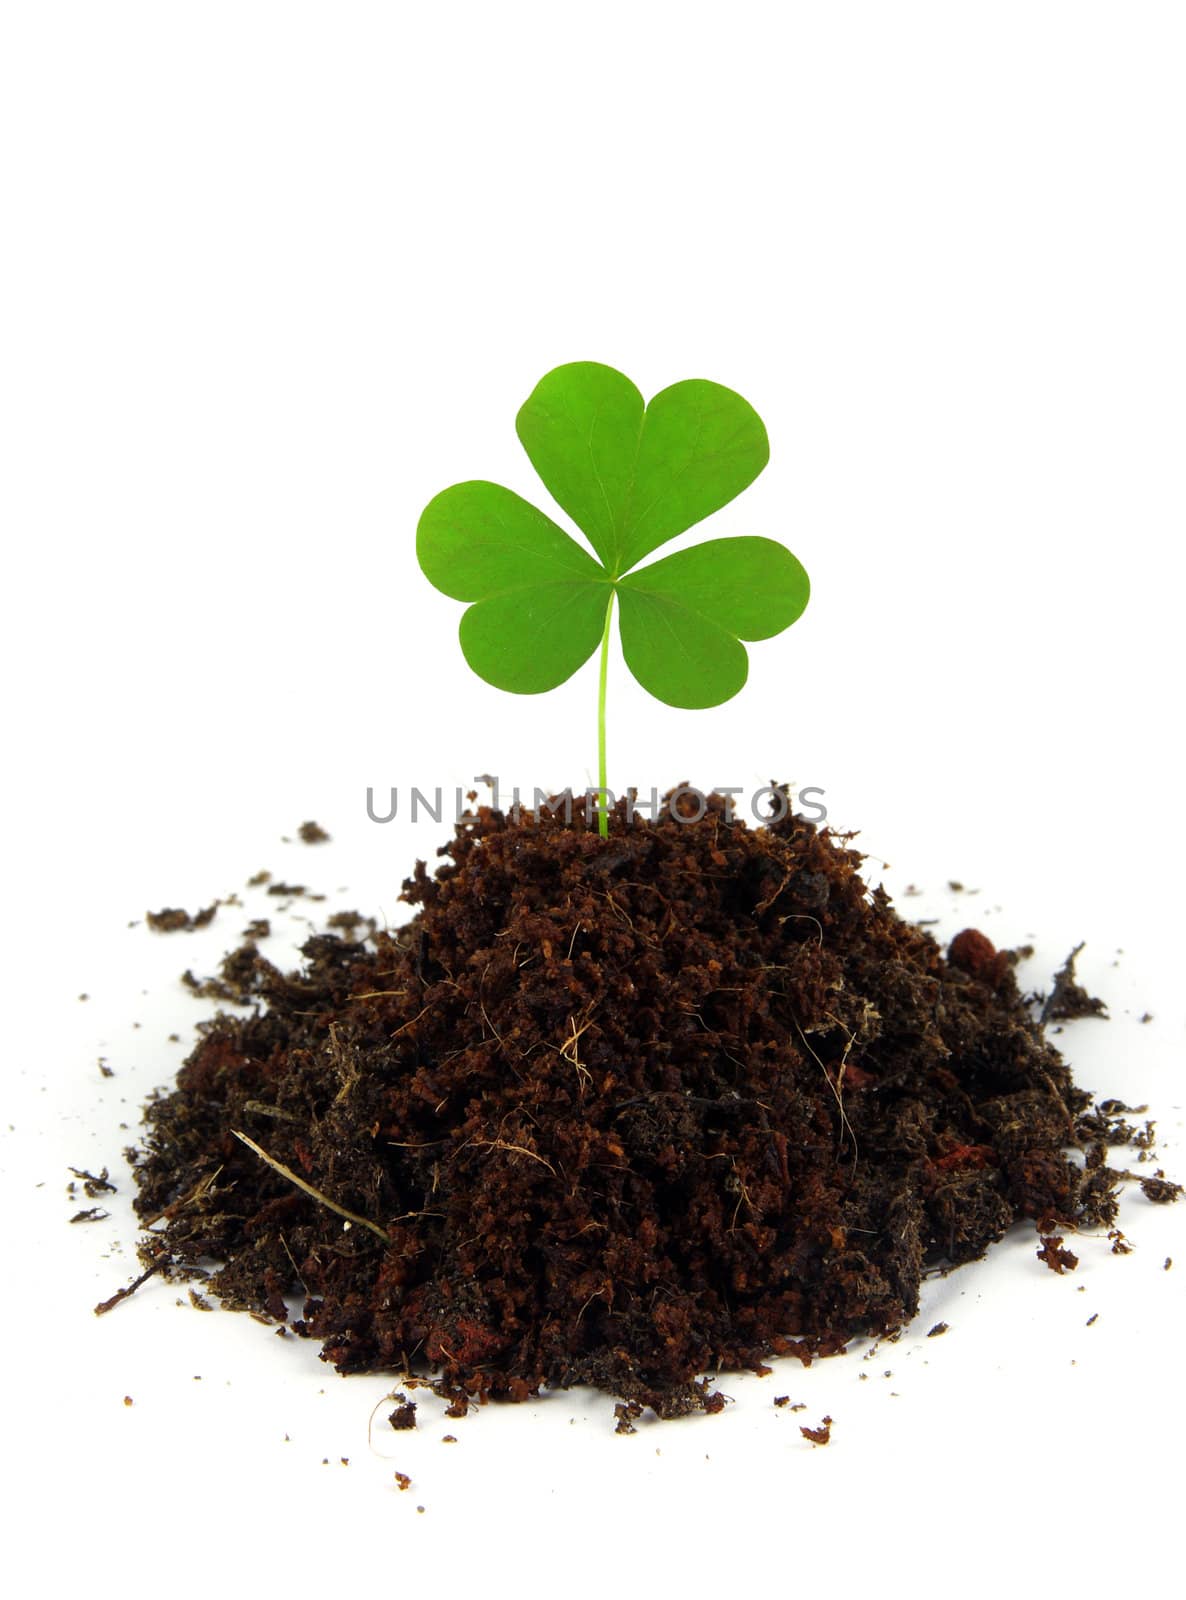 A single clover grows in a pile of soil shot on a white background.